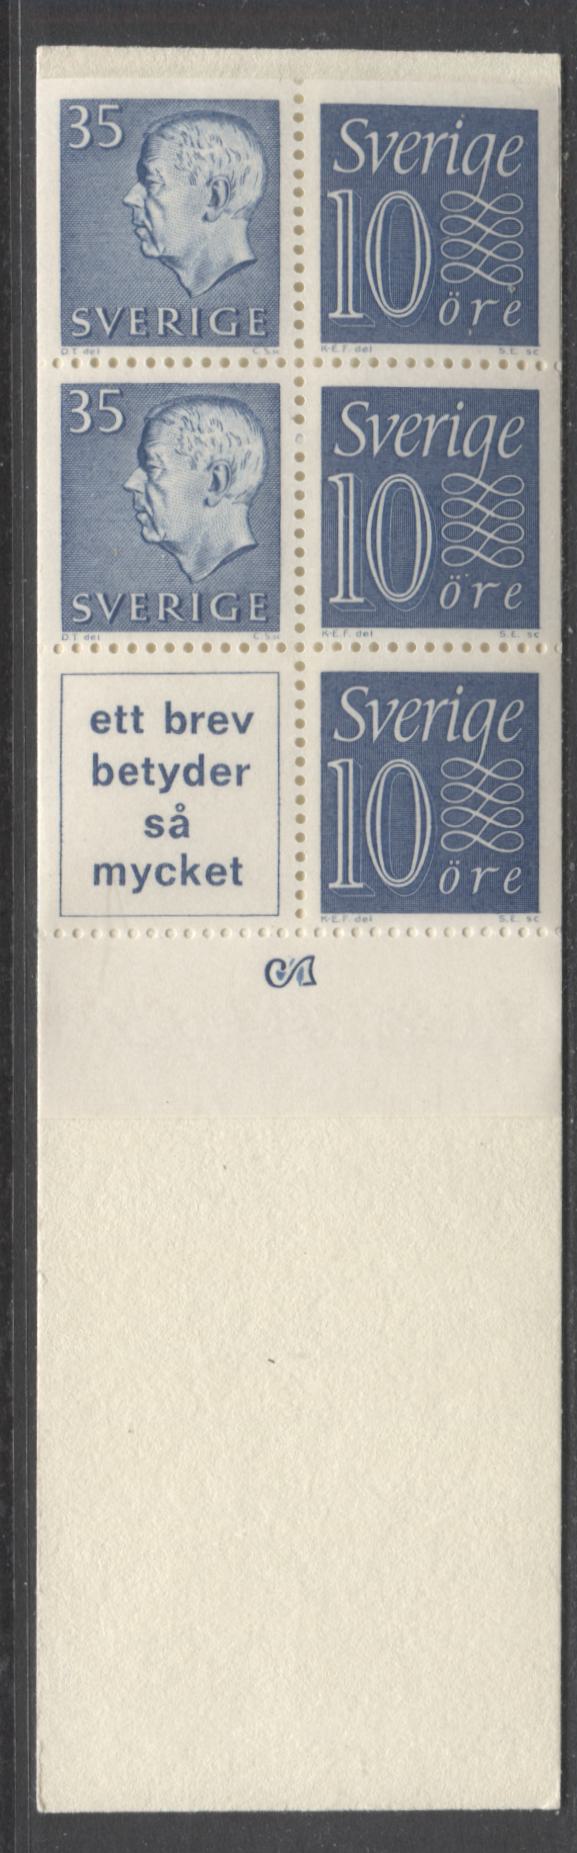 Lot 170 Sweden SC#586c (Facit #HA11BOH) 1963 Re-Engraved King Gustav VI Adolf Definitive Issue, With Inscribed Label, Inverted Pane, 10 Ore Stamps At Right, Horizontal Cylinder 2 Marking, A VFNH Booklet of 6 (2 +3 + Label), Estimated Value $15